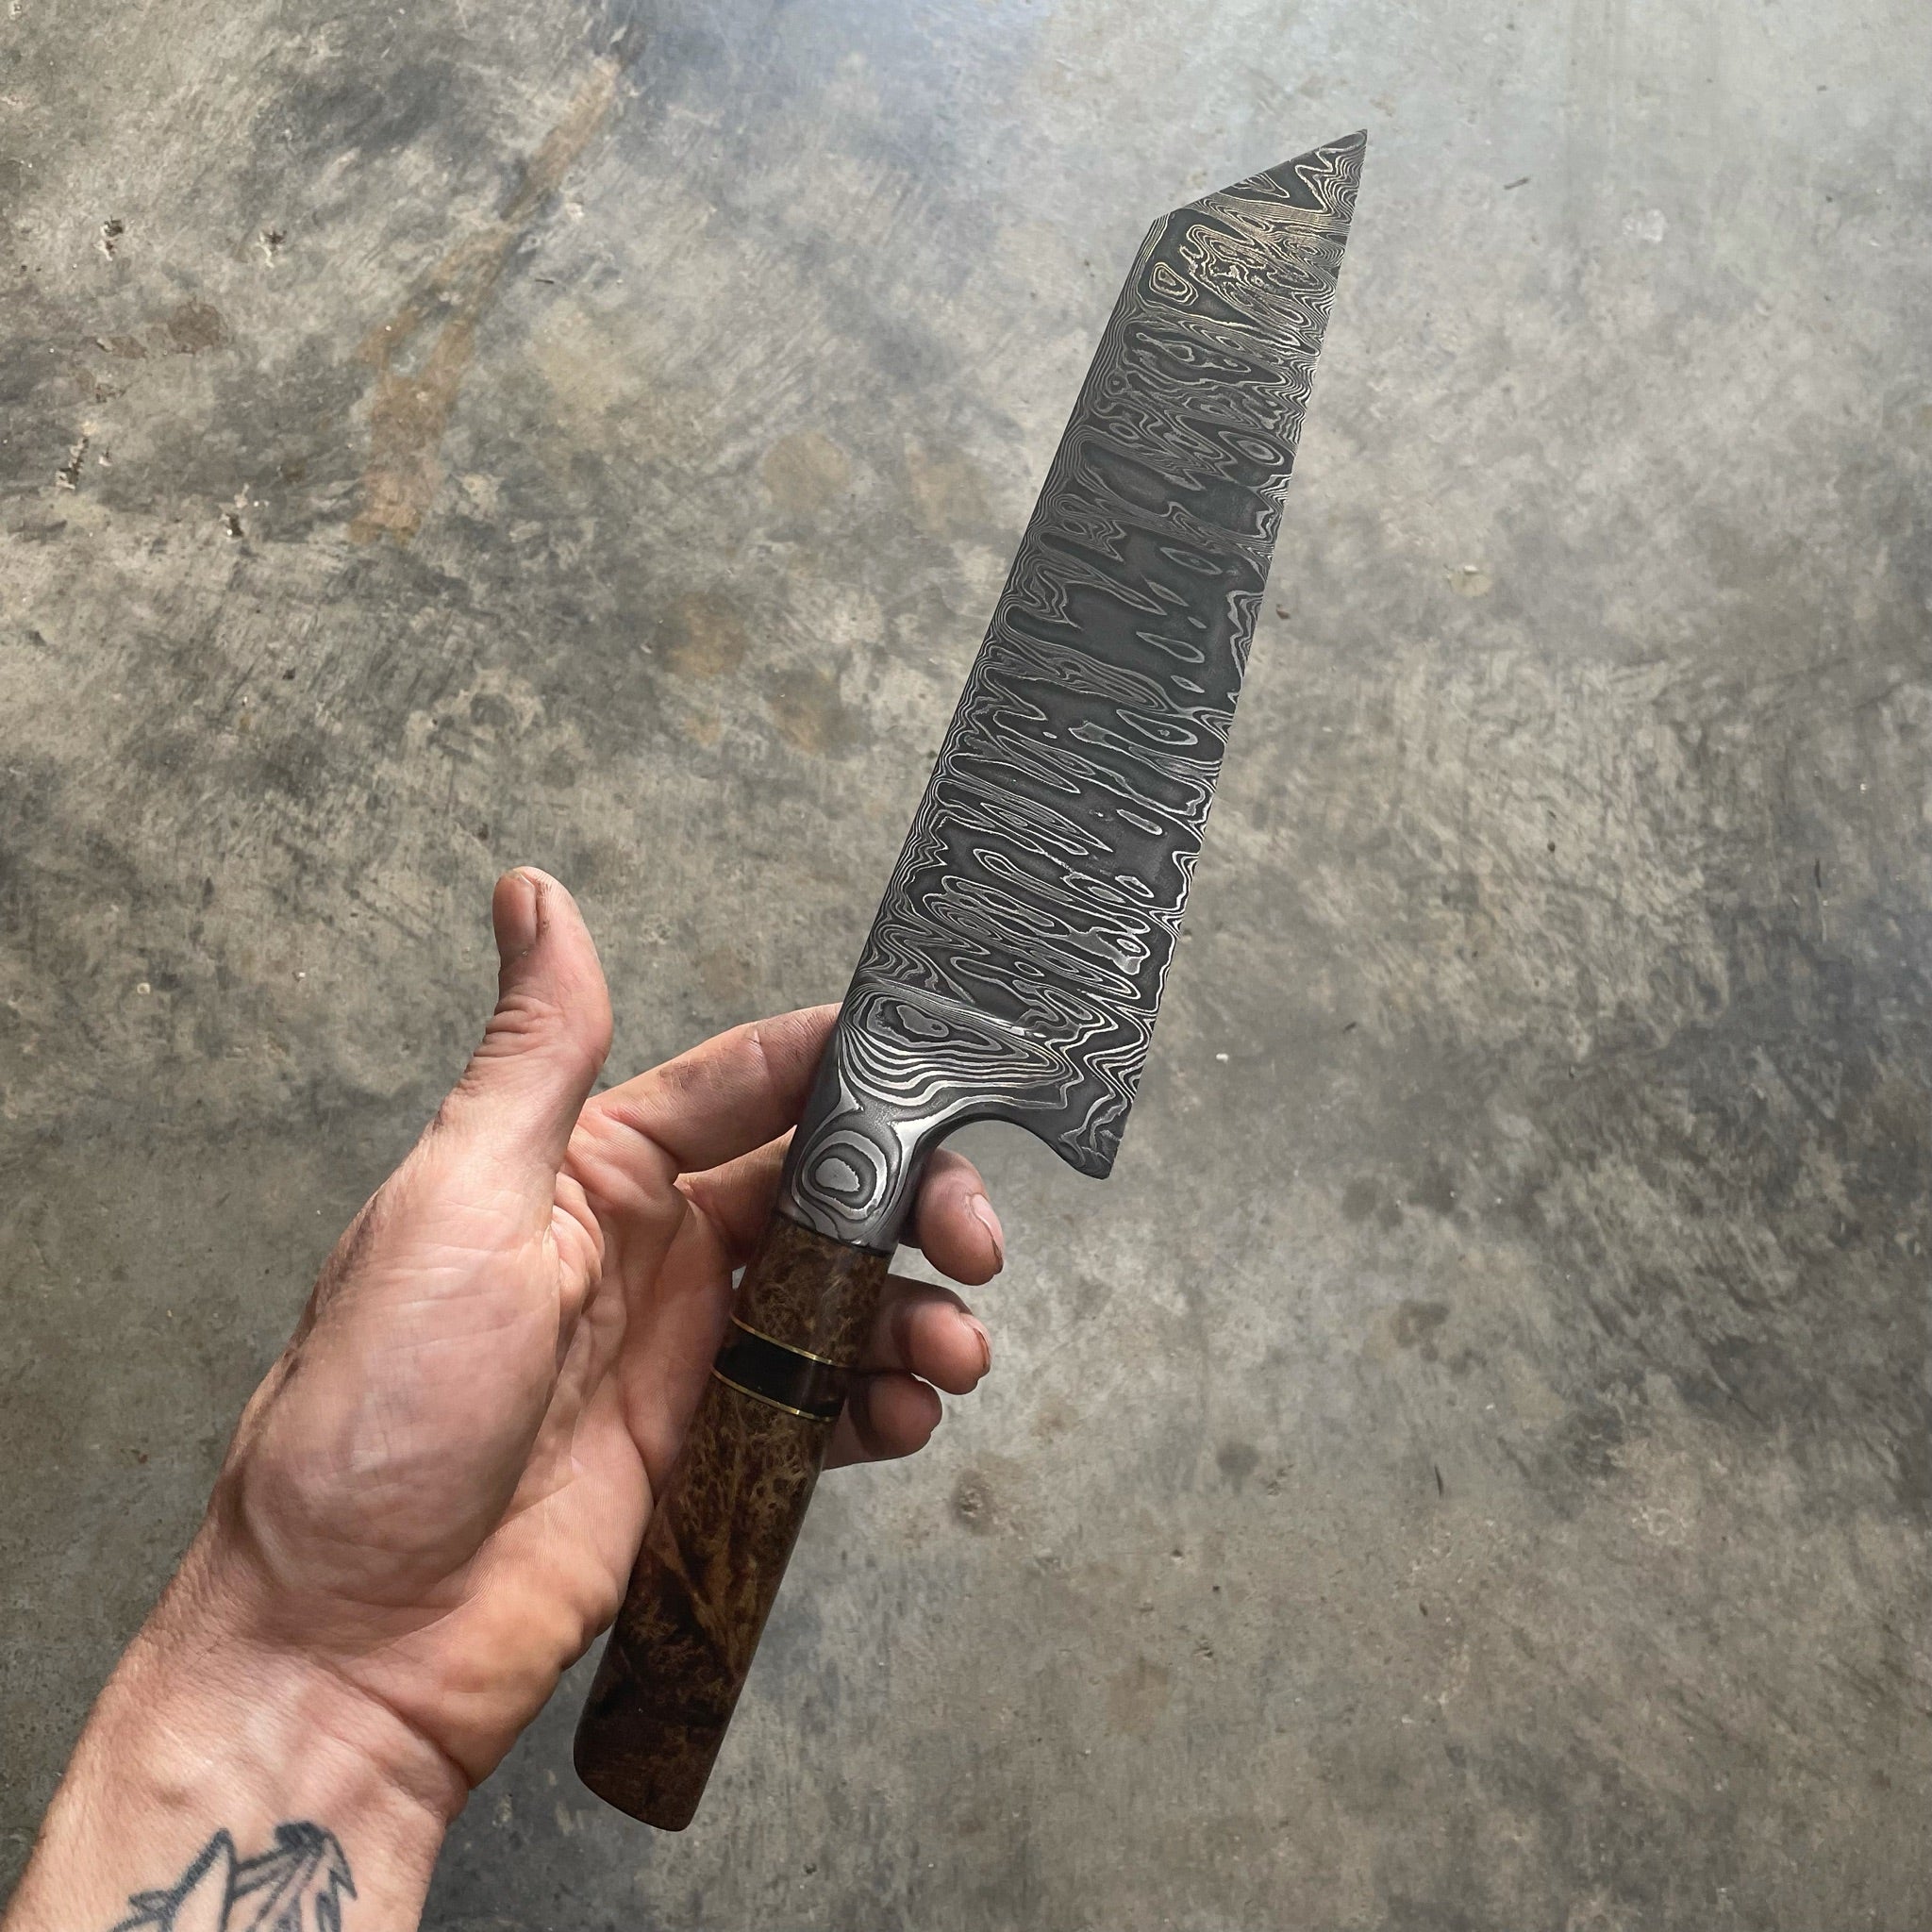 integral bolster knife being held by hand on concrete background